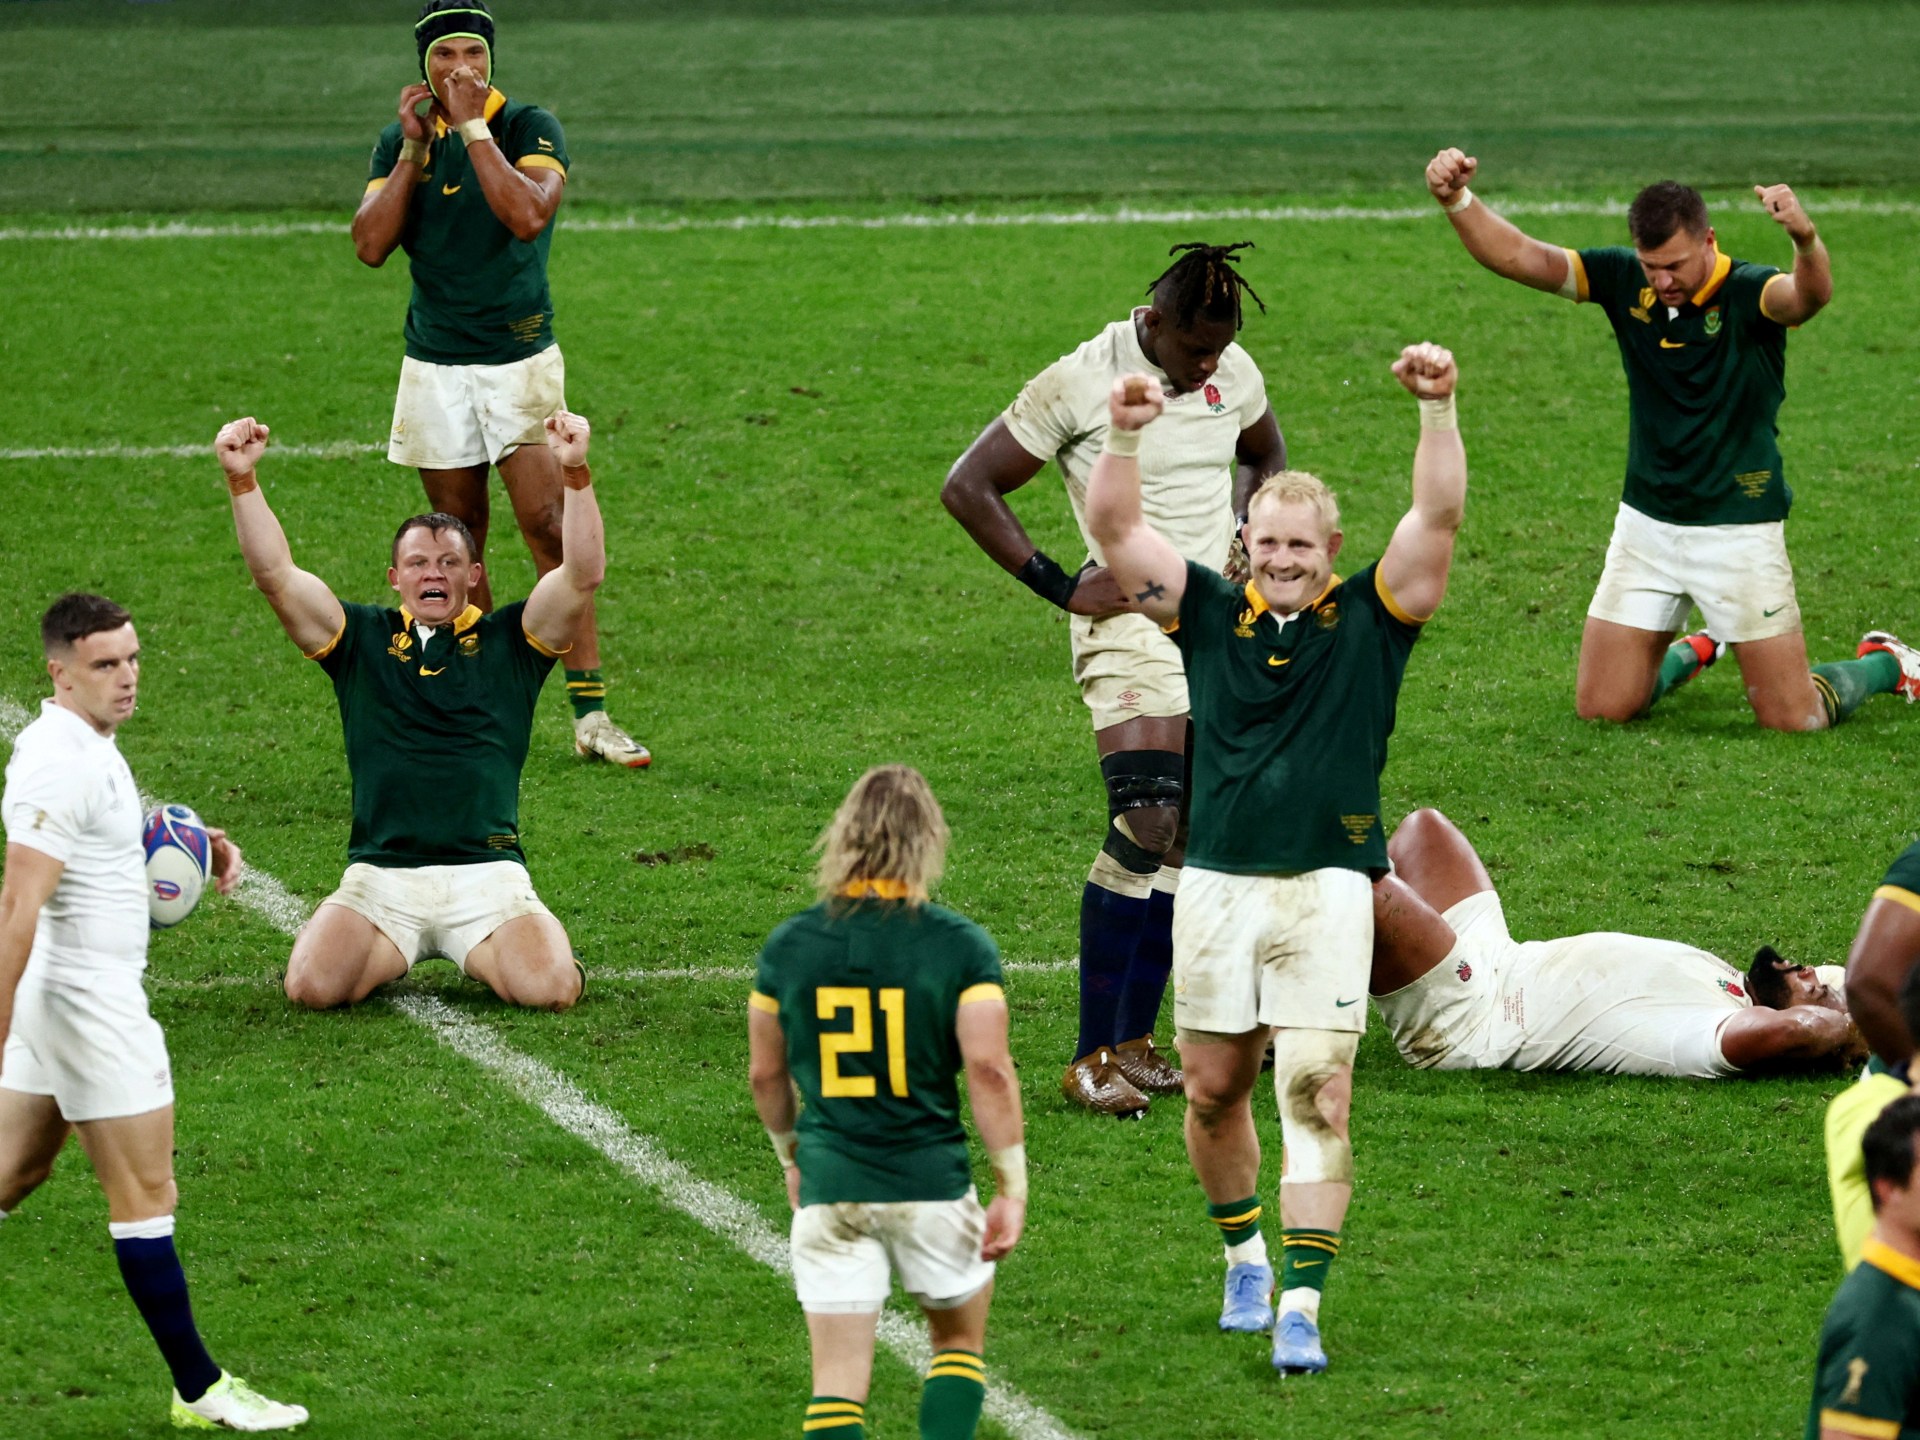 Late kick gives South Africa ‘ugly’ win over England in Rugby World Cup